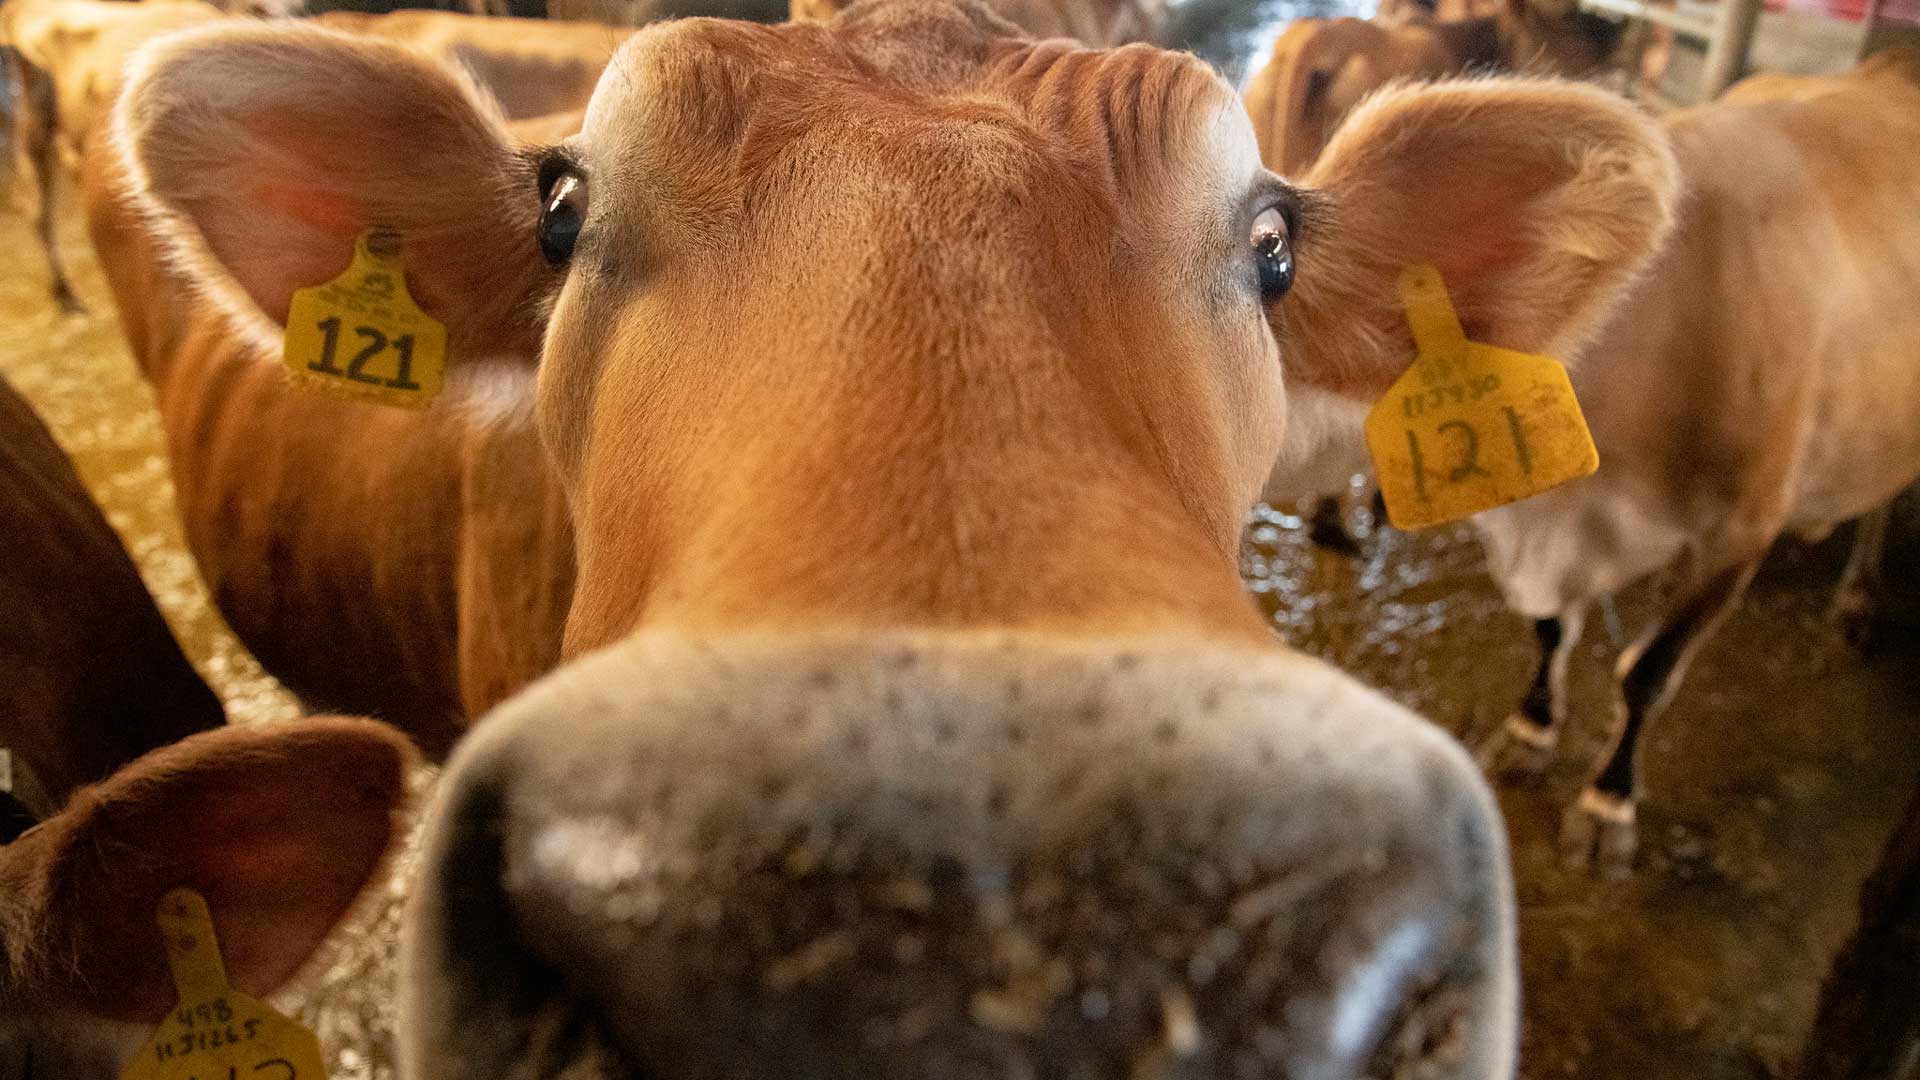 As bird flu spreads in cows, here are 4 big questions scientists are trying to answer